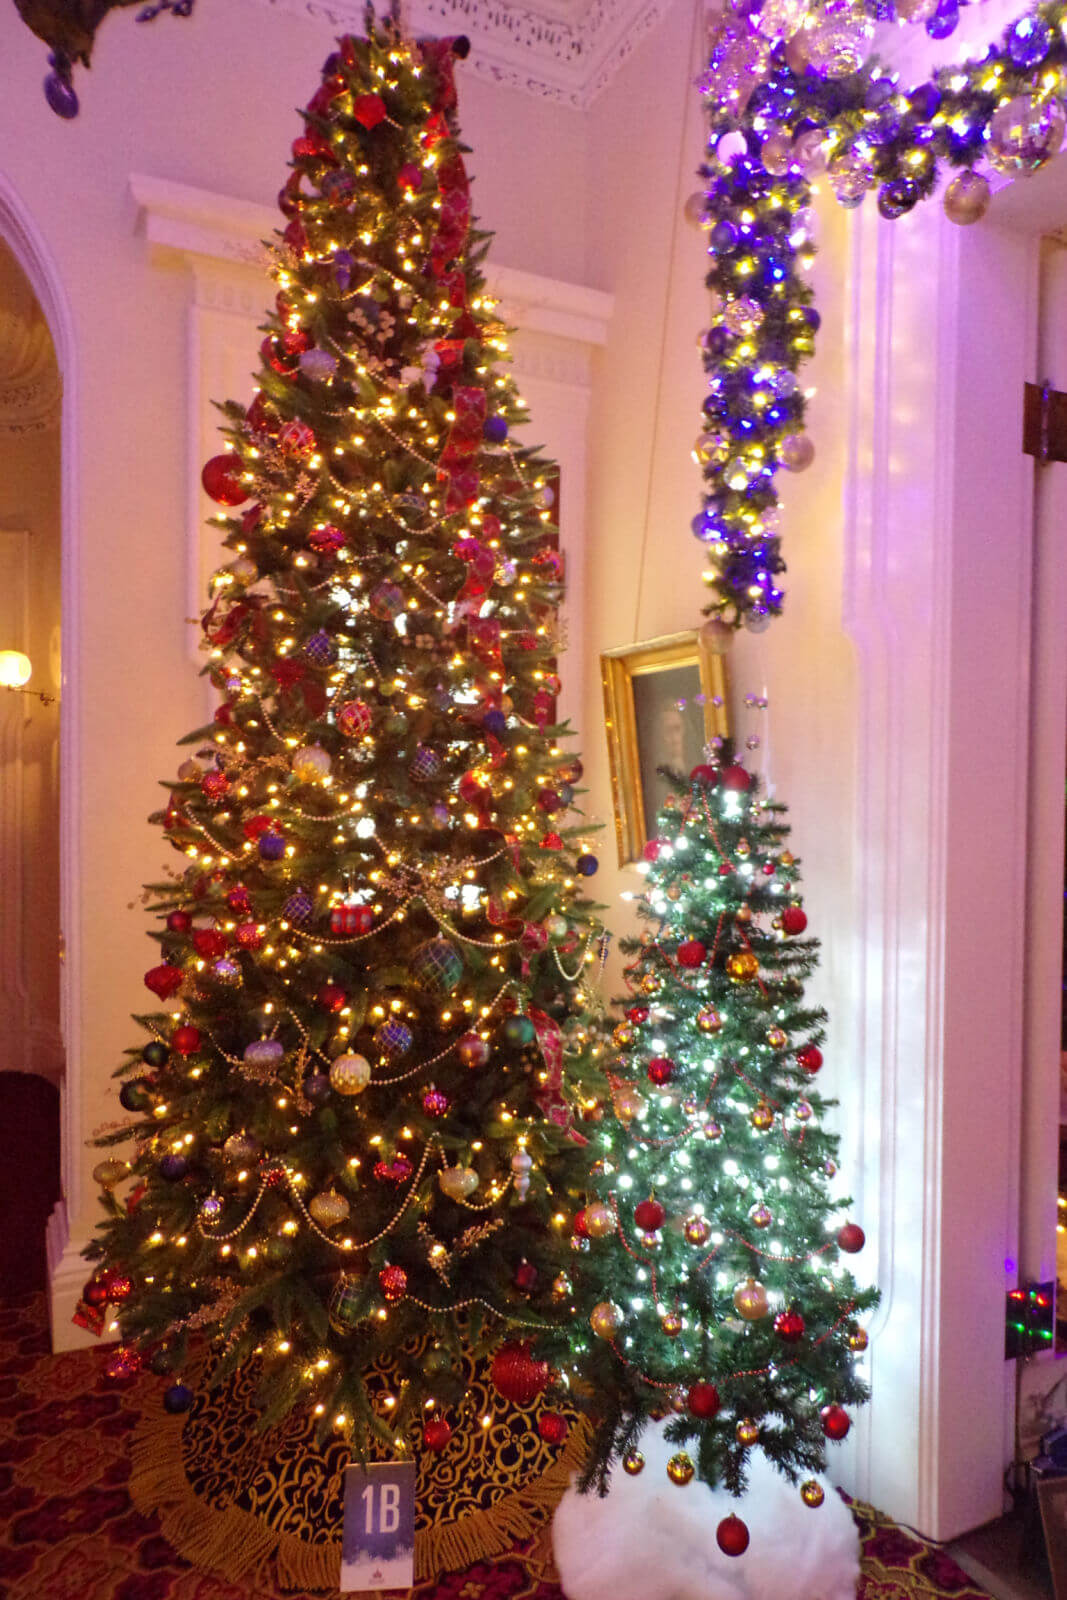 A finely decorated Christmas tree inside the Lincoln-Tallman House.